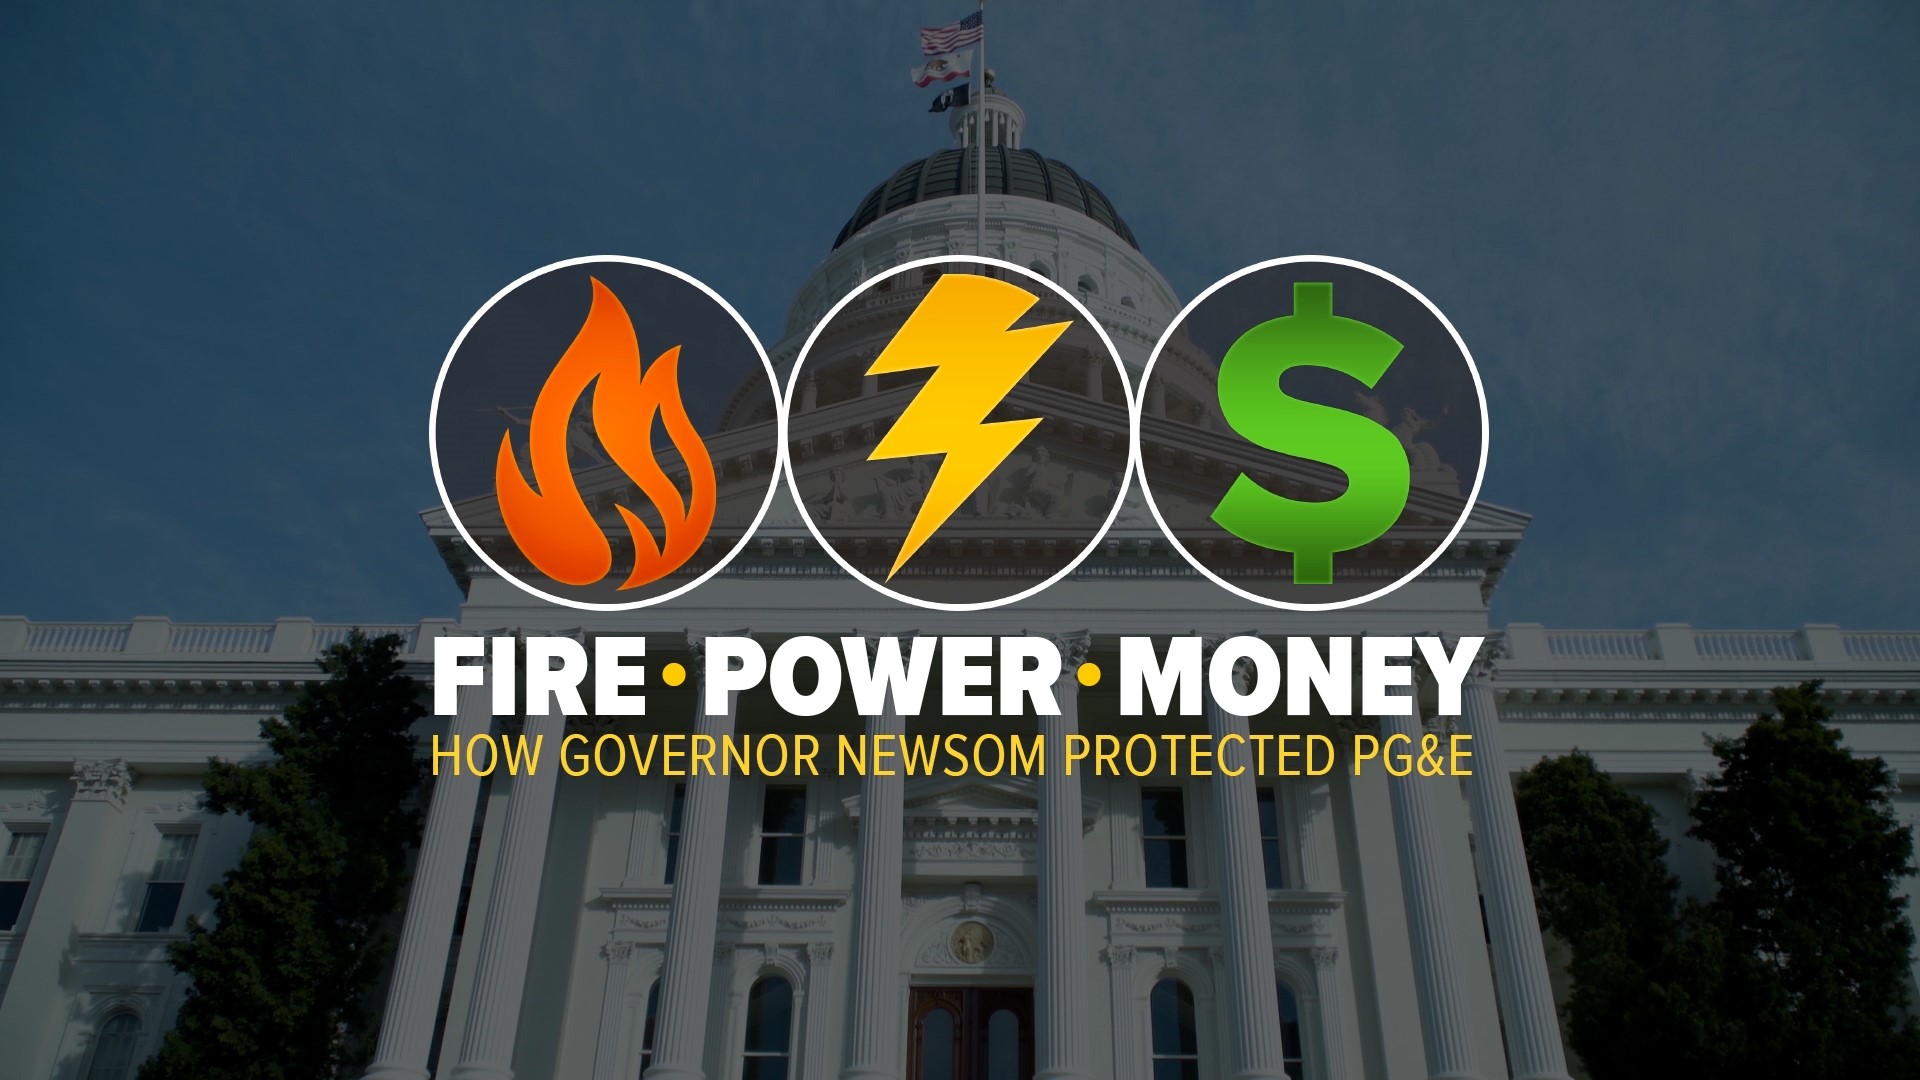 Fire - Power - Money's third season special investigates how Governor Gavin Newsom protected PG&E at the expense of wildfire victims and California taxpayers.